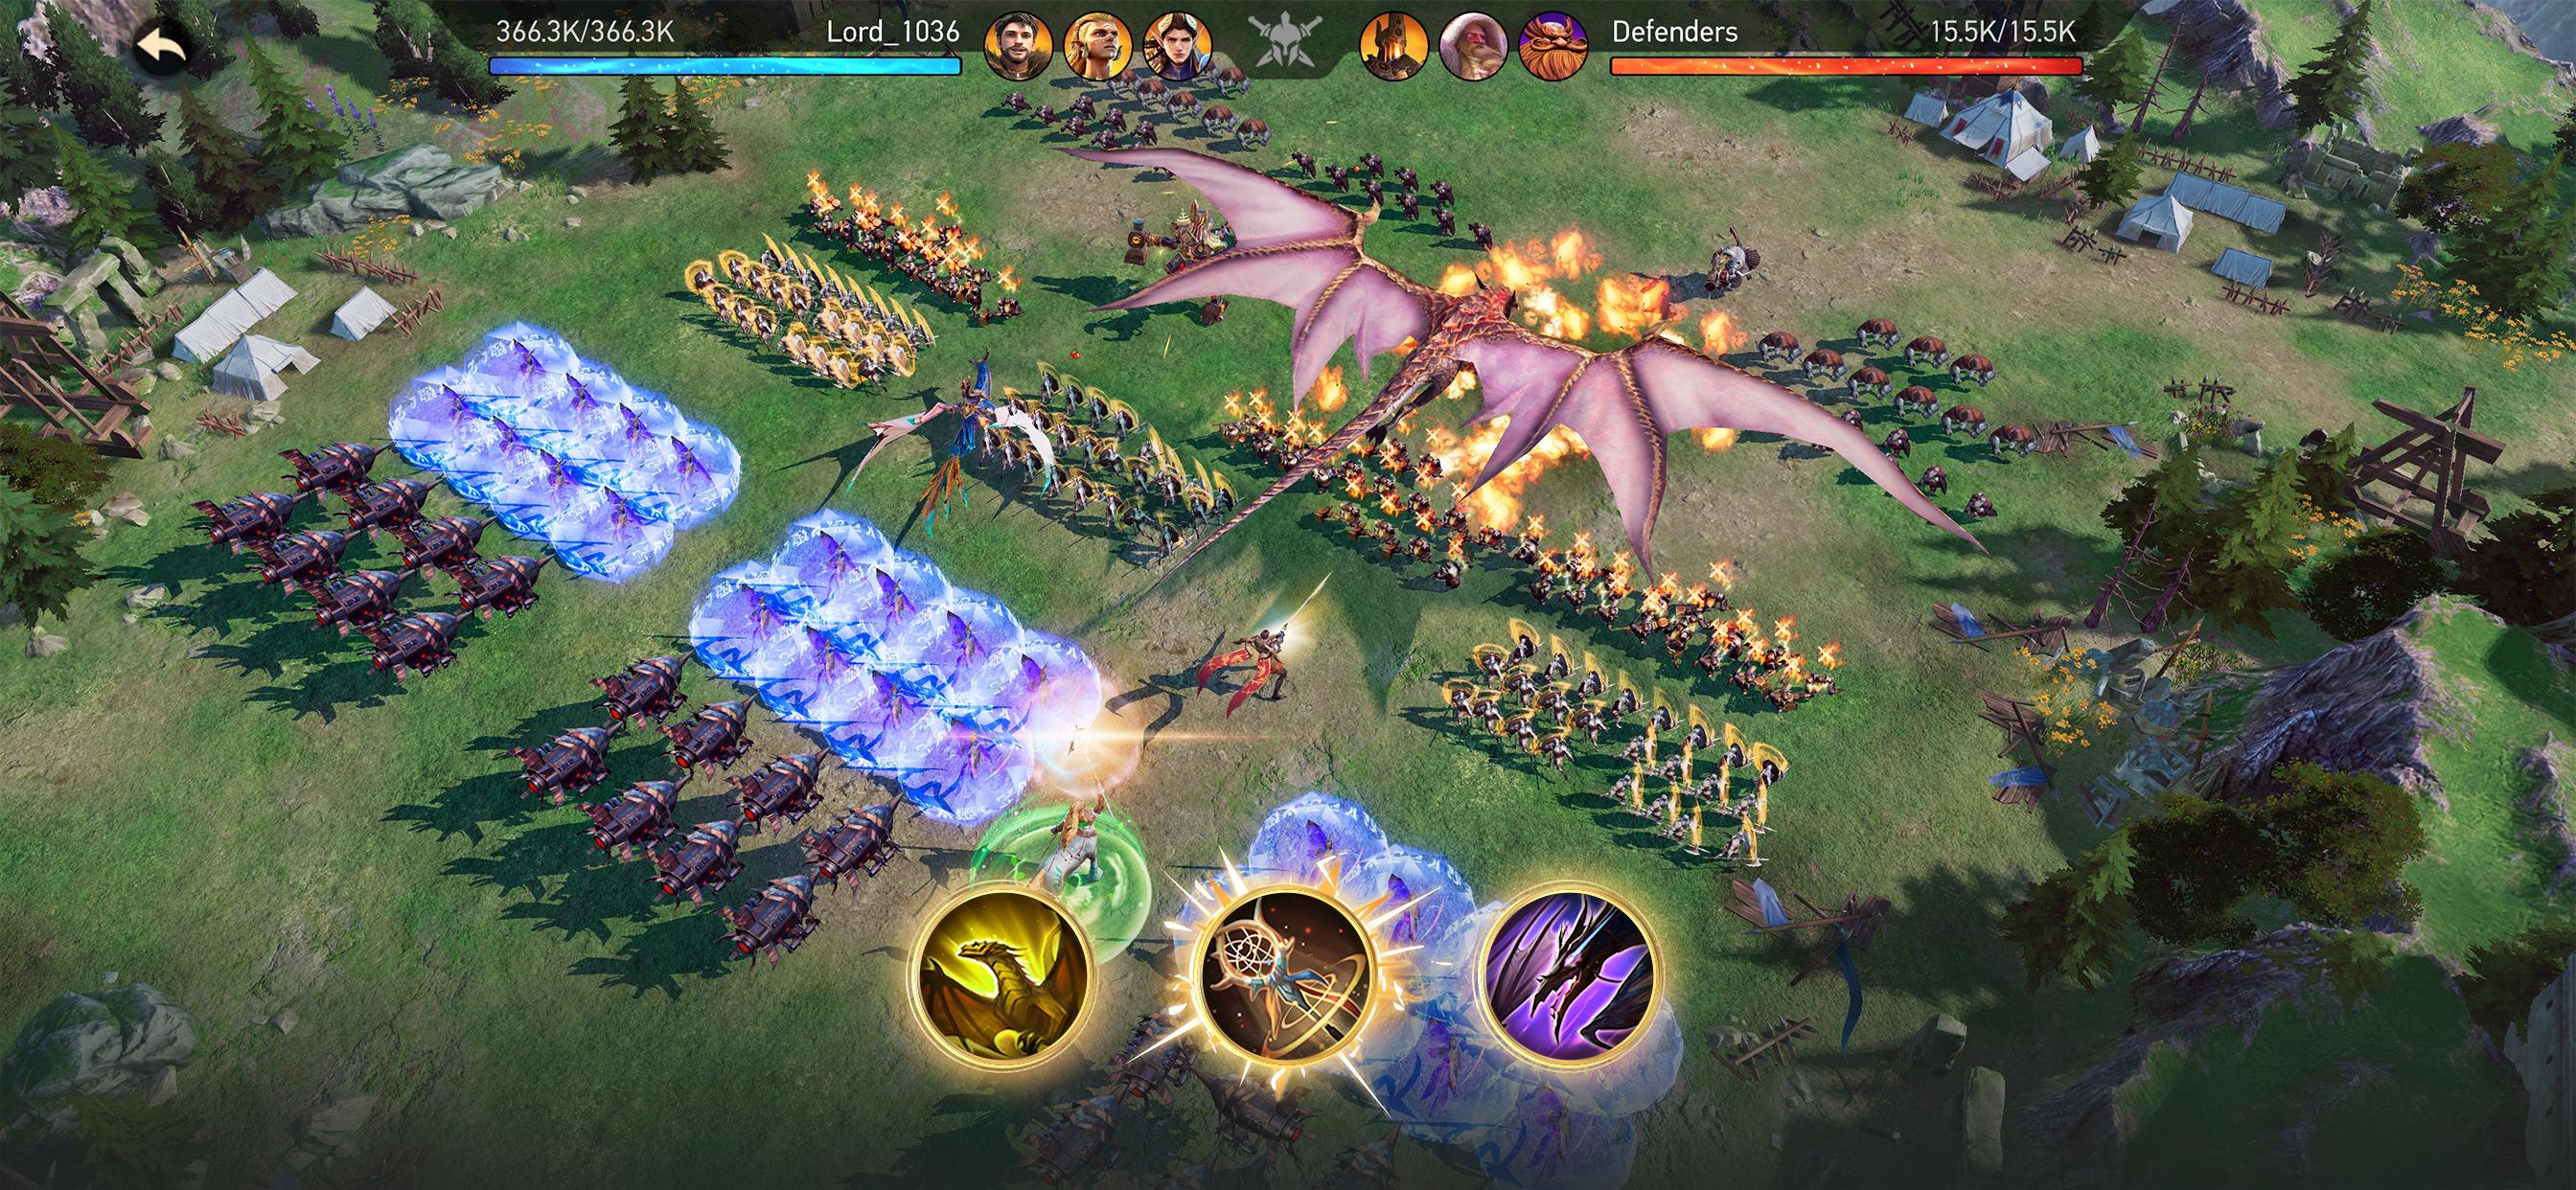 Игра Art of Conquest. Art of Conquest коды. Игра SAE of Conquest. Sea of Conquest Скриншоты. Sea of conquest бонус коды